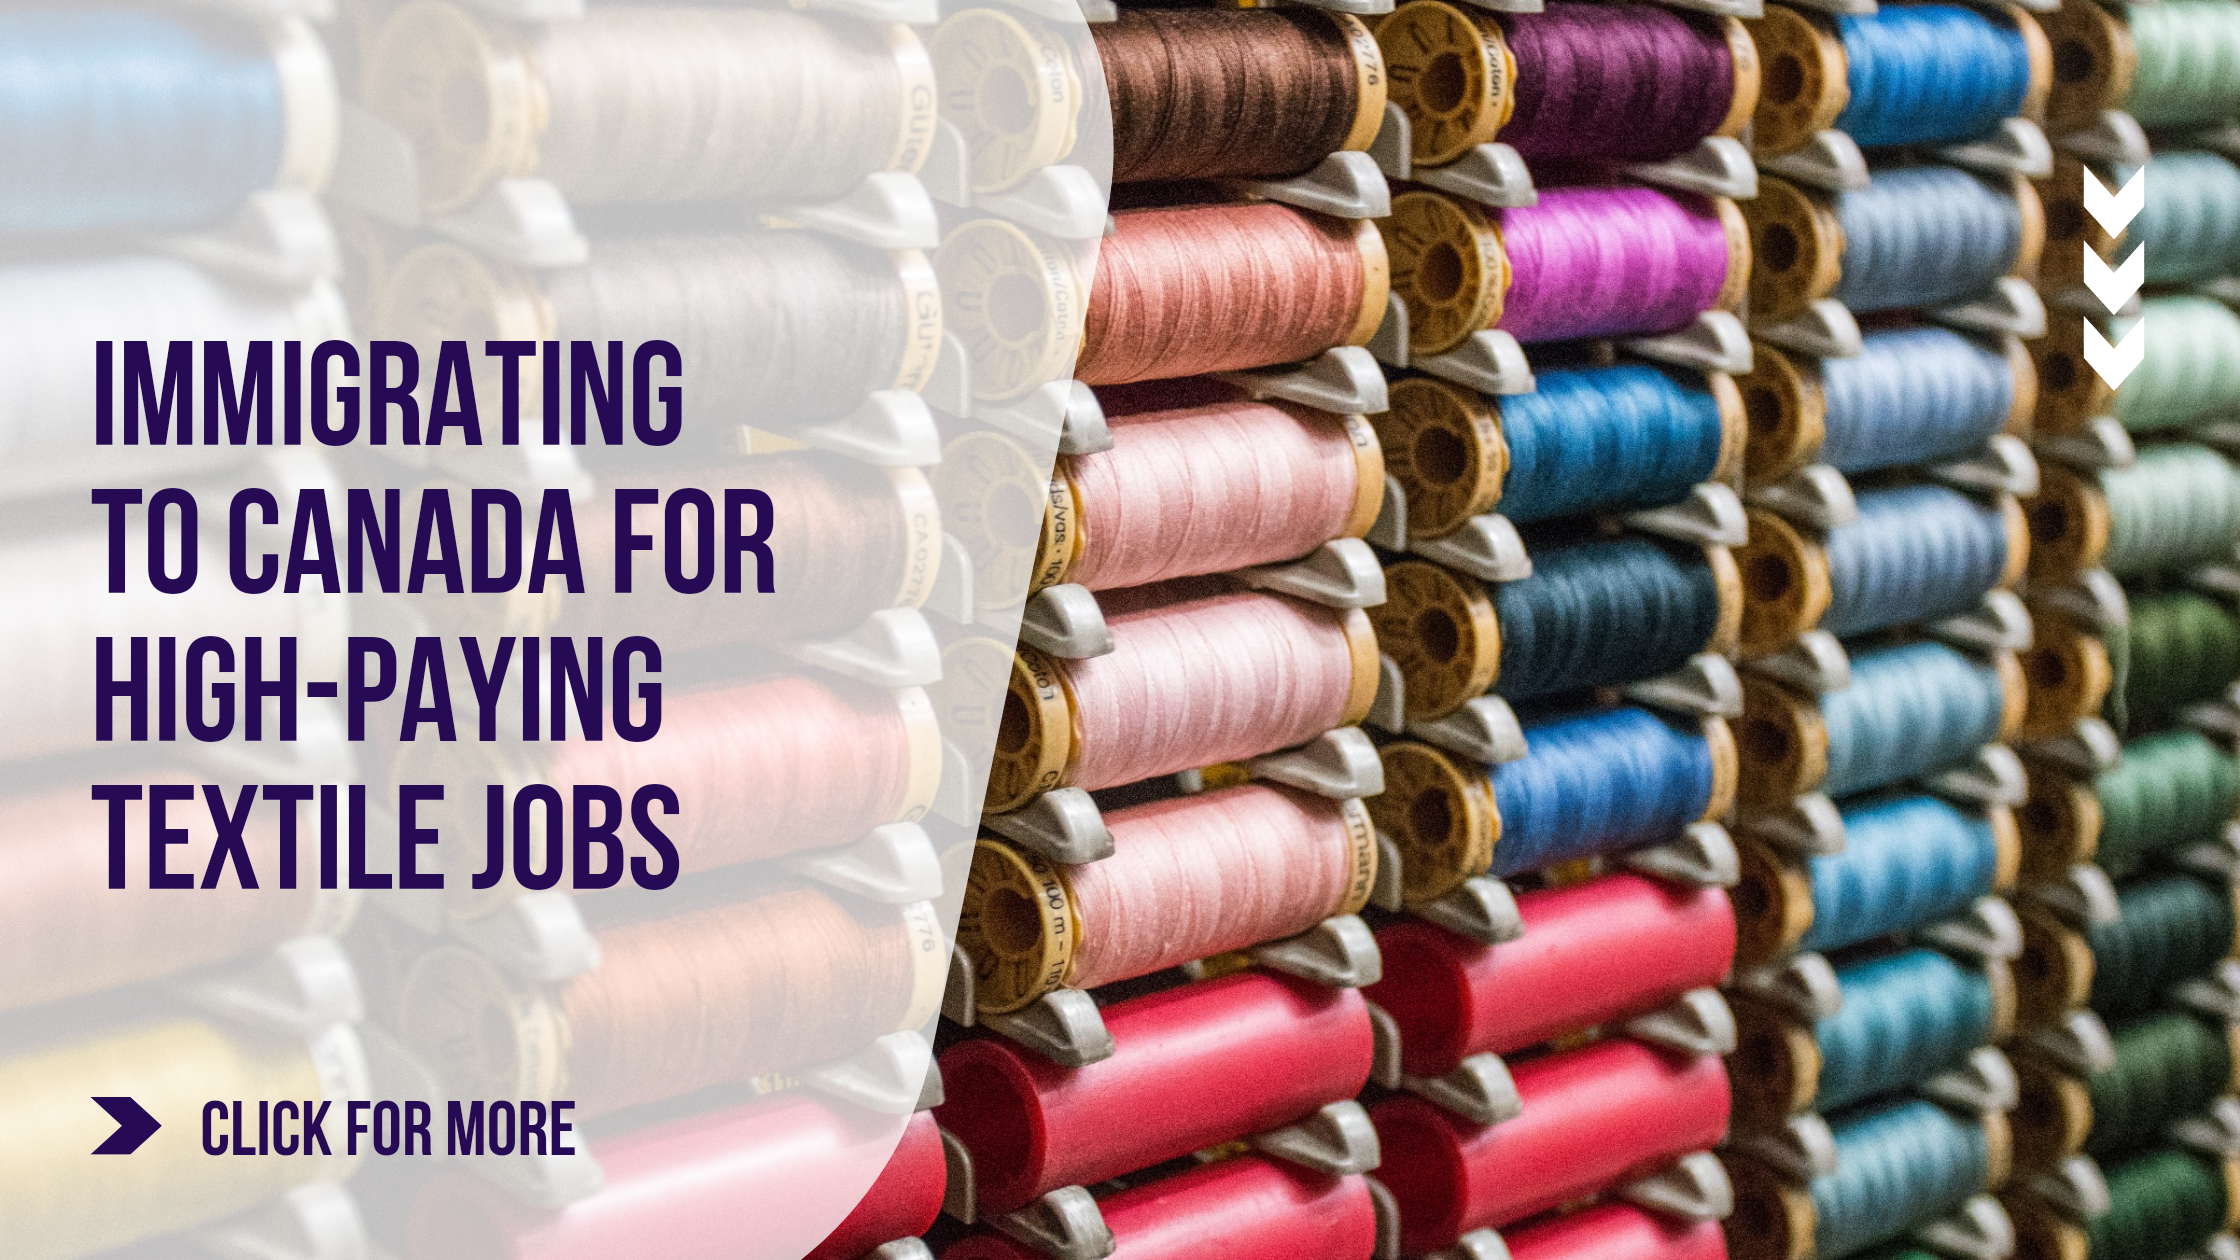 Why Immigrating to Canada for High-Paying Textile Jobs is a Good Idea